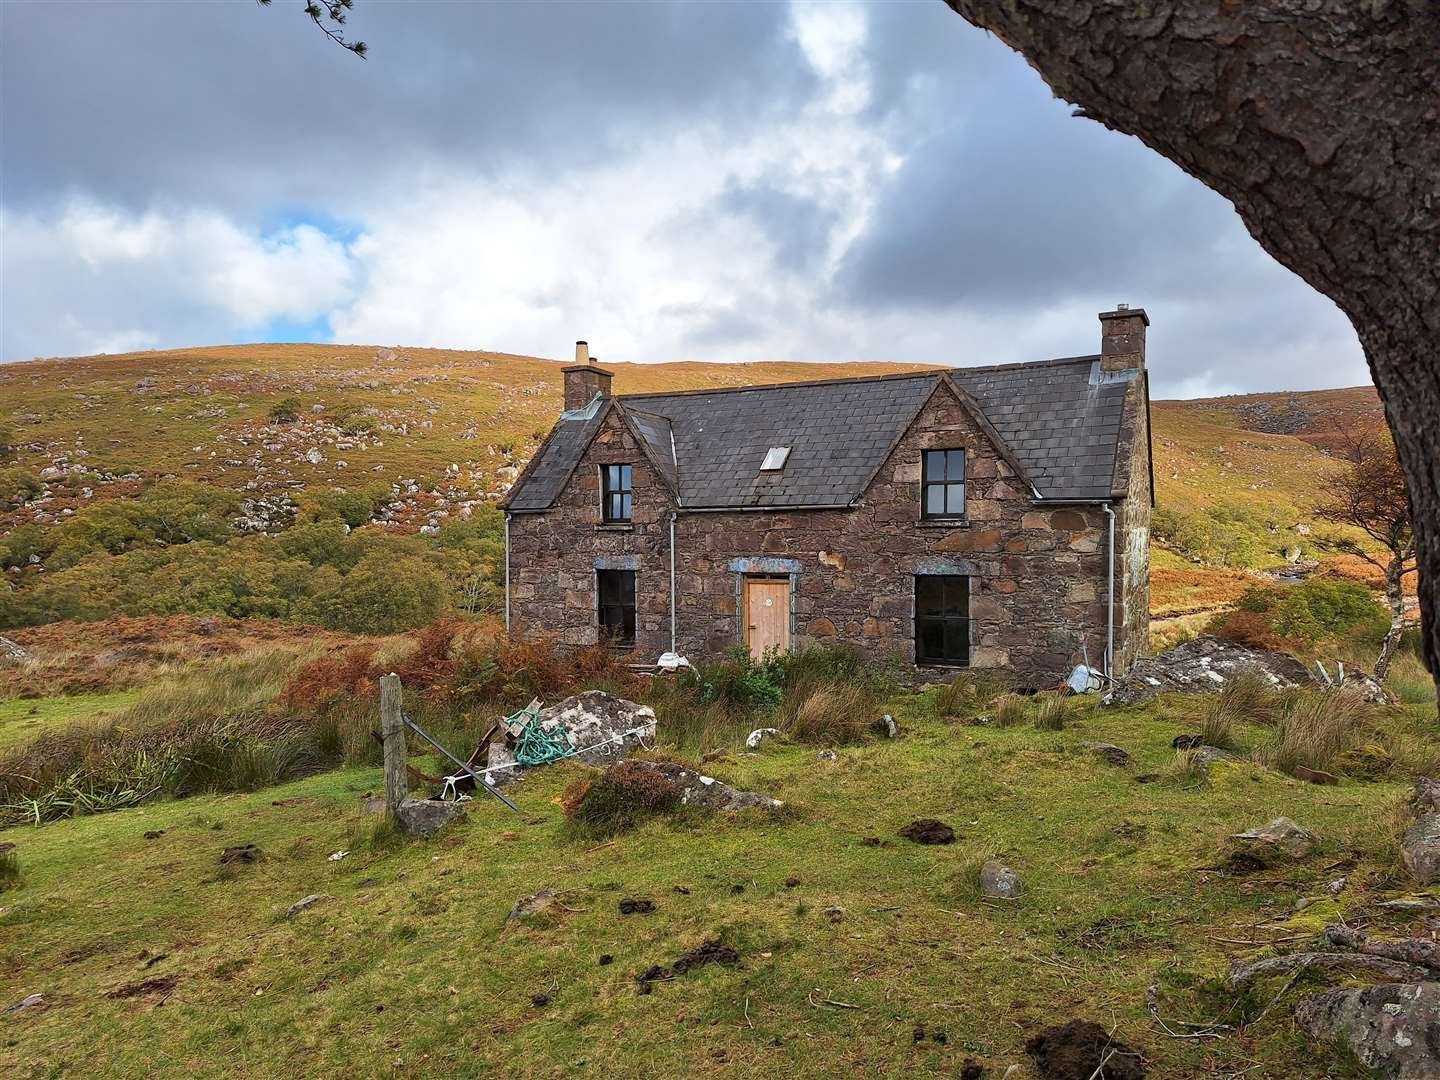 An external view of the bothy.